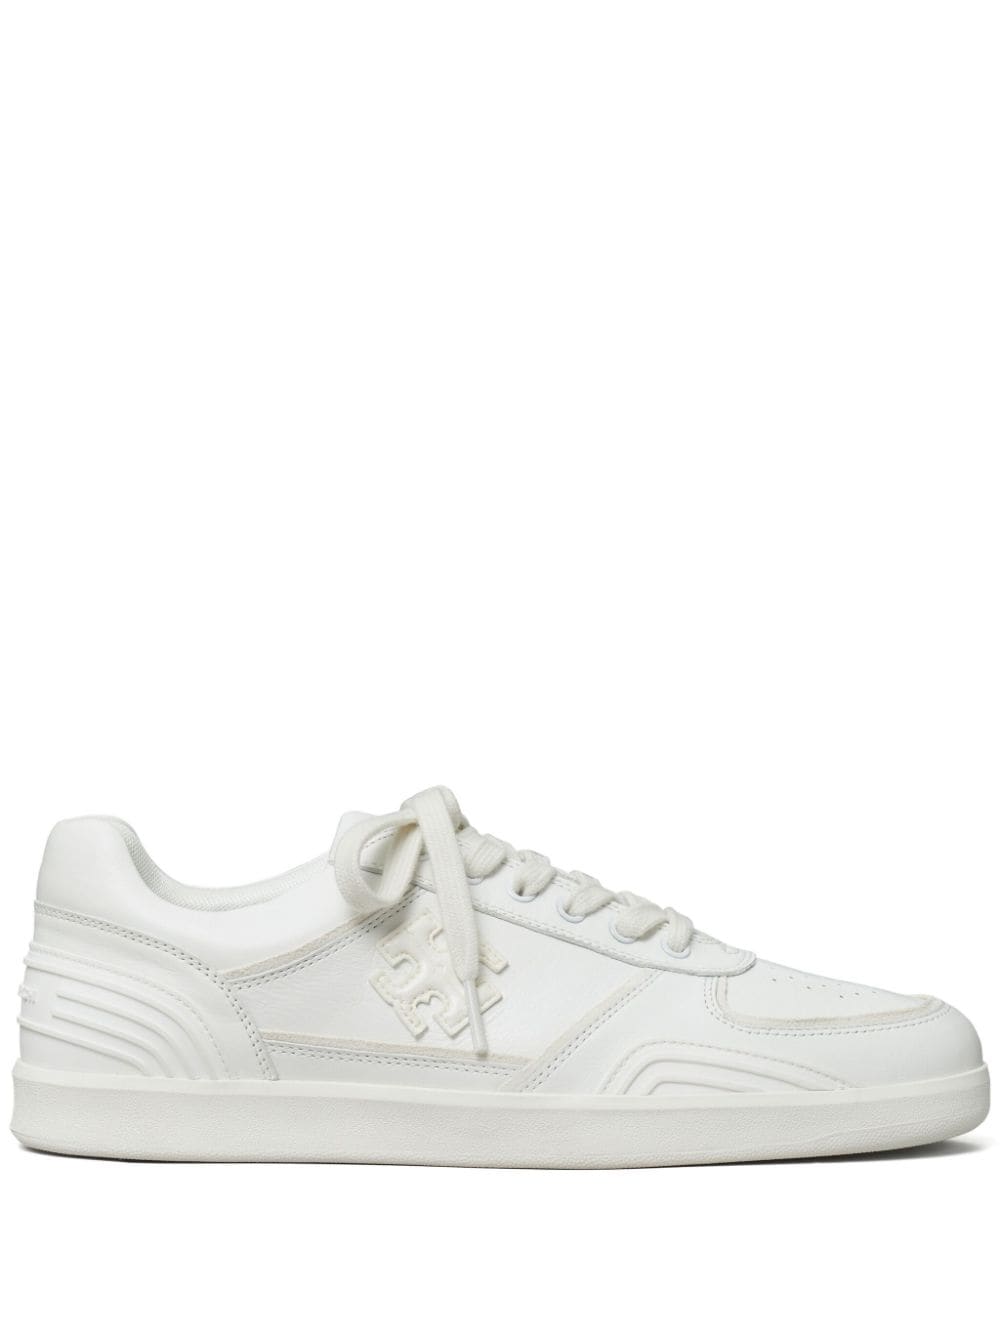 Tory Burch Clover logo-patch sneakers - White von Tory Burch